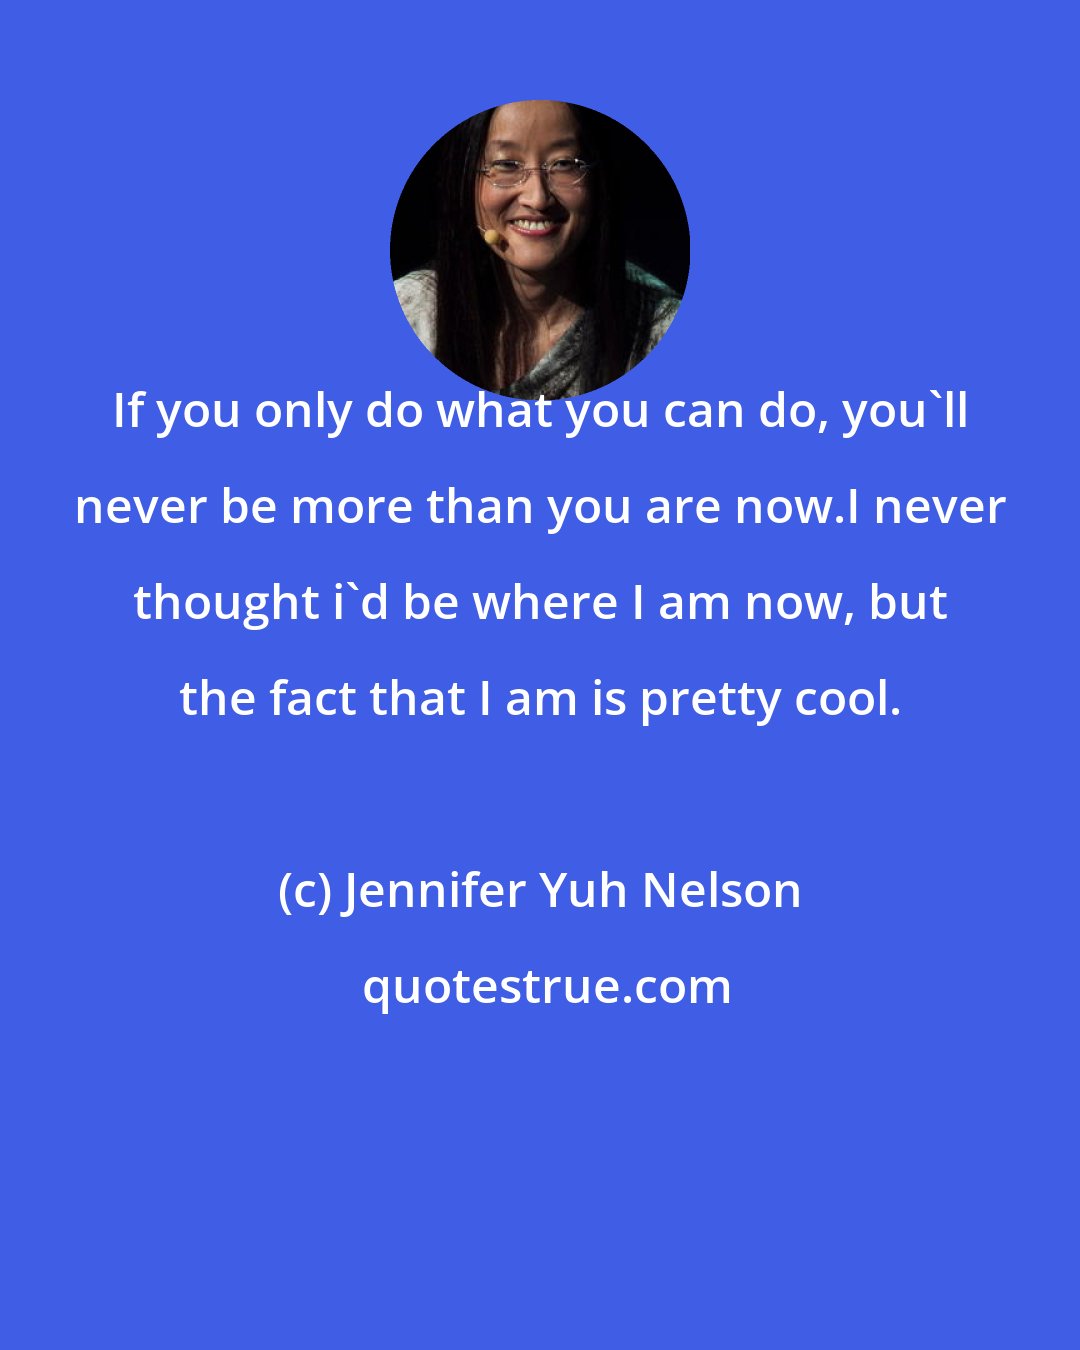 Jennifer Yuh Nelson: If you only do what you can do, you'll never be more than you are now.I never thought i'd be where I am now, but the fact that I am is pretty cool.